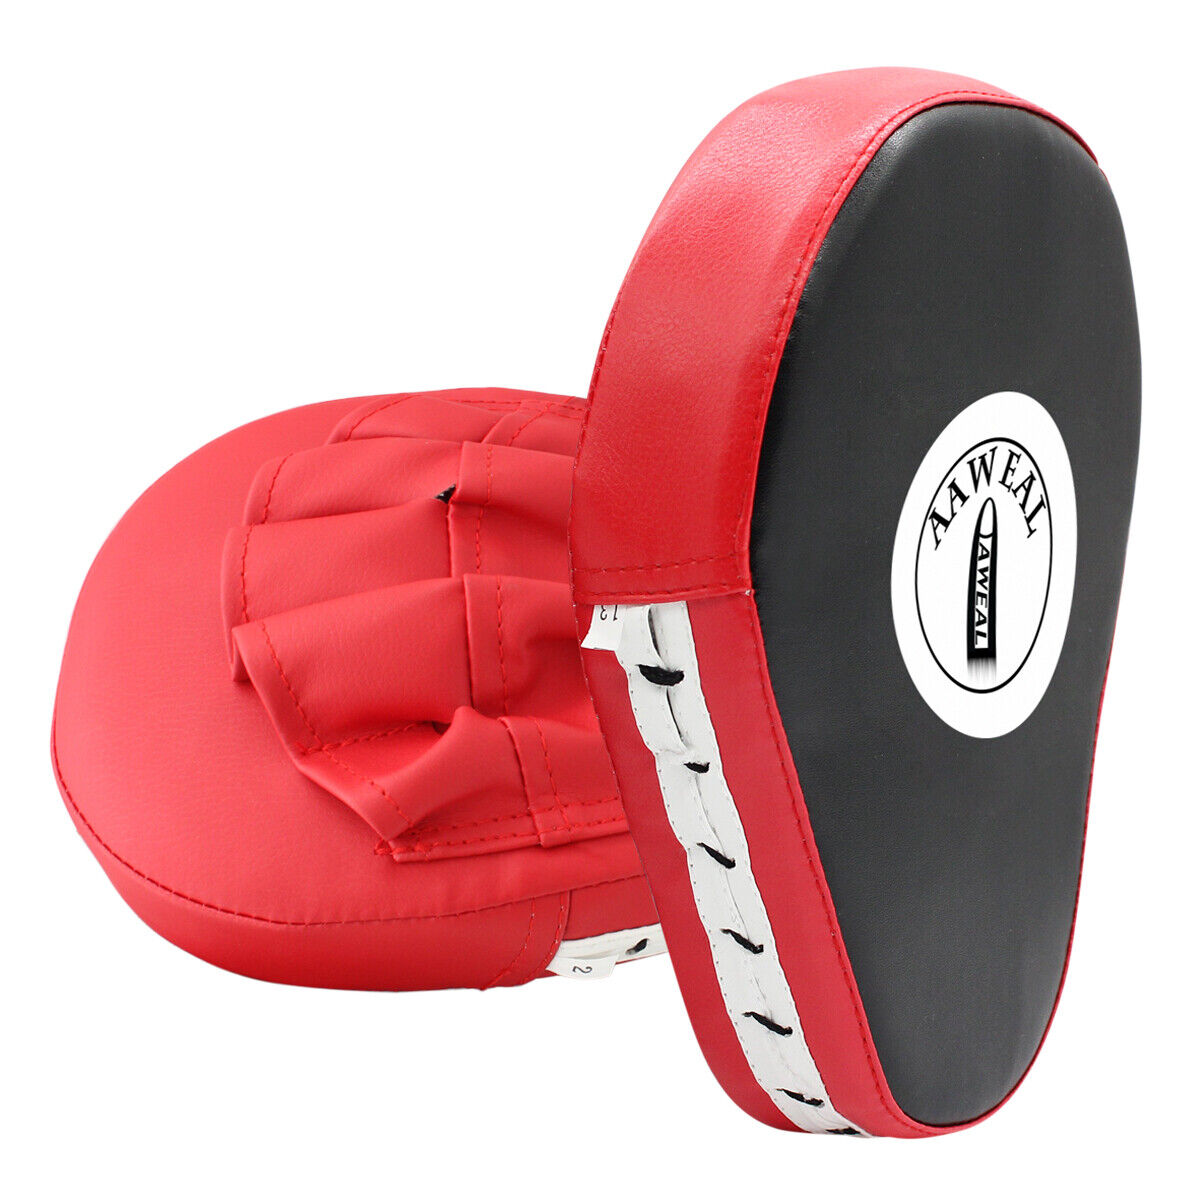 2x Punching Mitts Kickboxing Training Punch MMA Boxing Hand Target Focus Pads Aaweal Does Not Apply - фотография #5